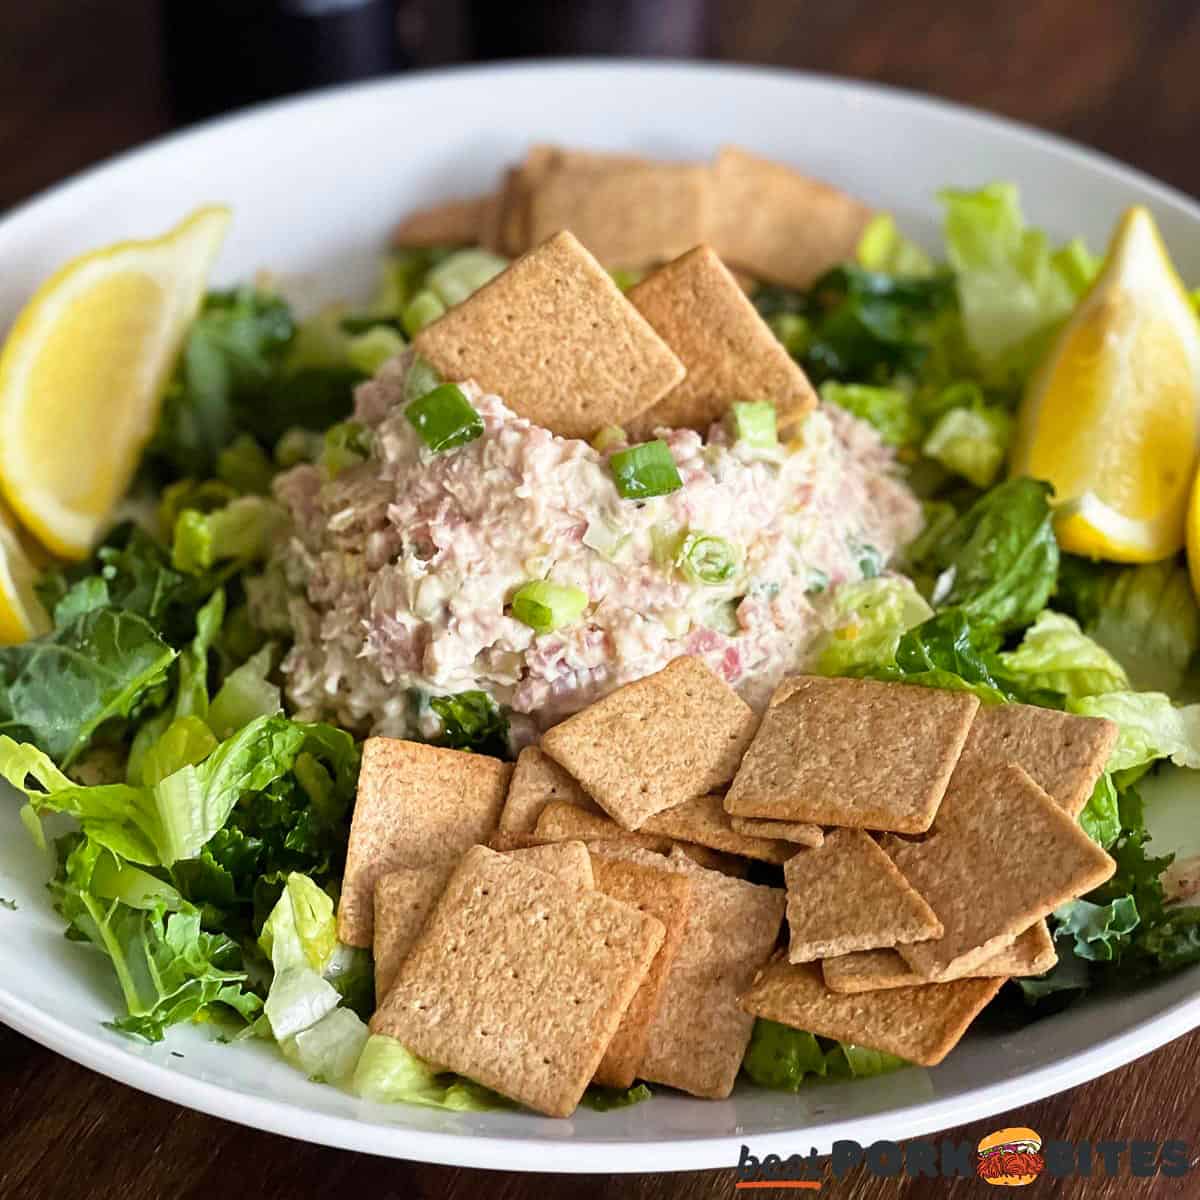 a closeup image of a plate of ham salad with lettuce, crackers and lemon slices